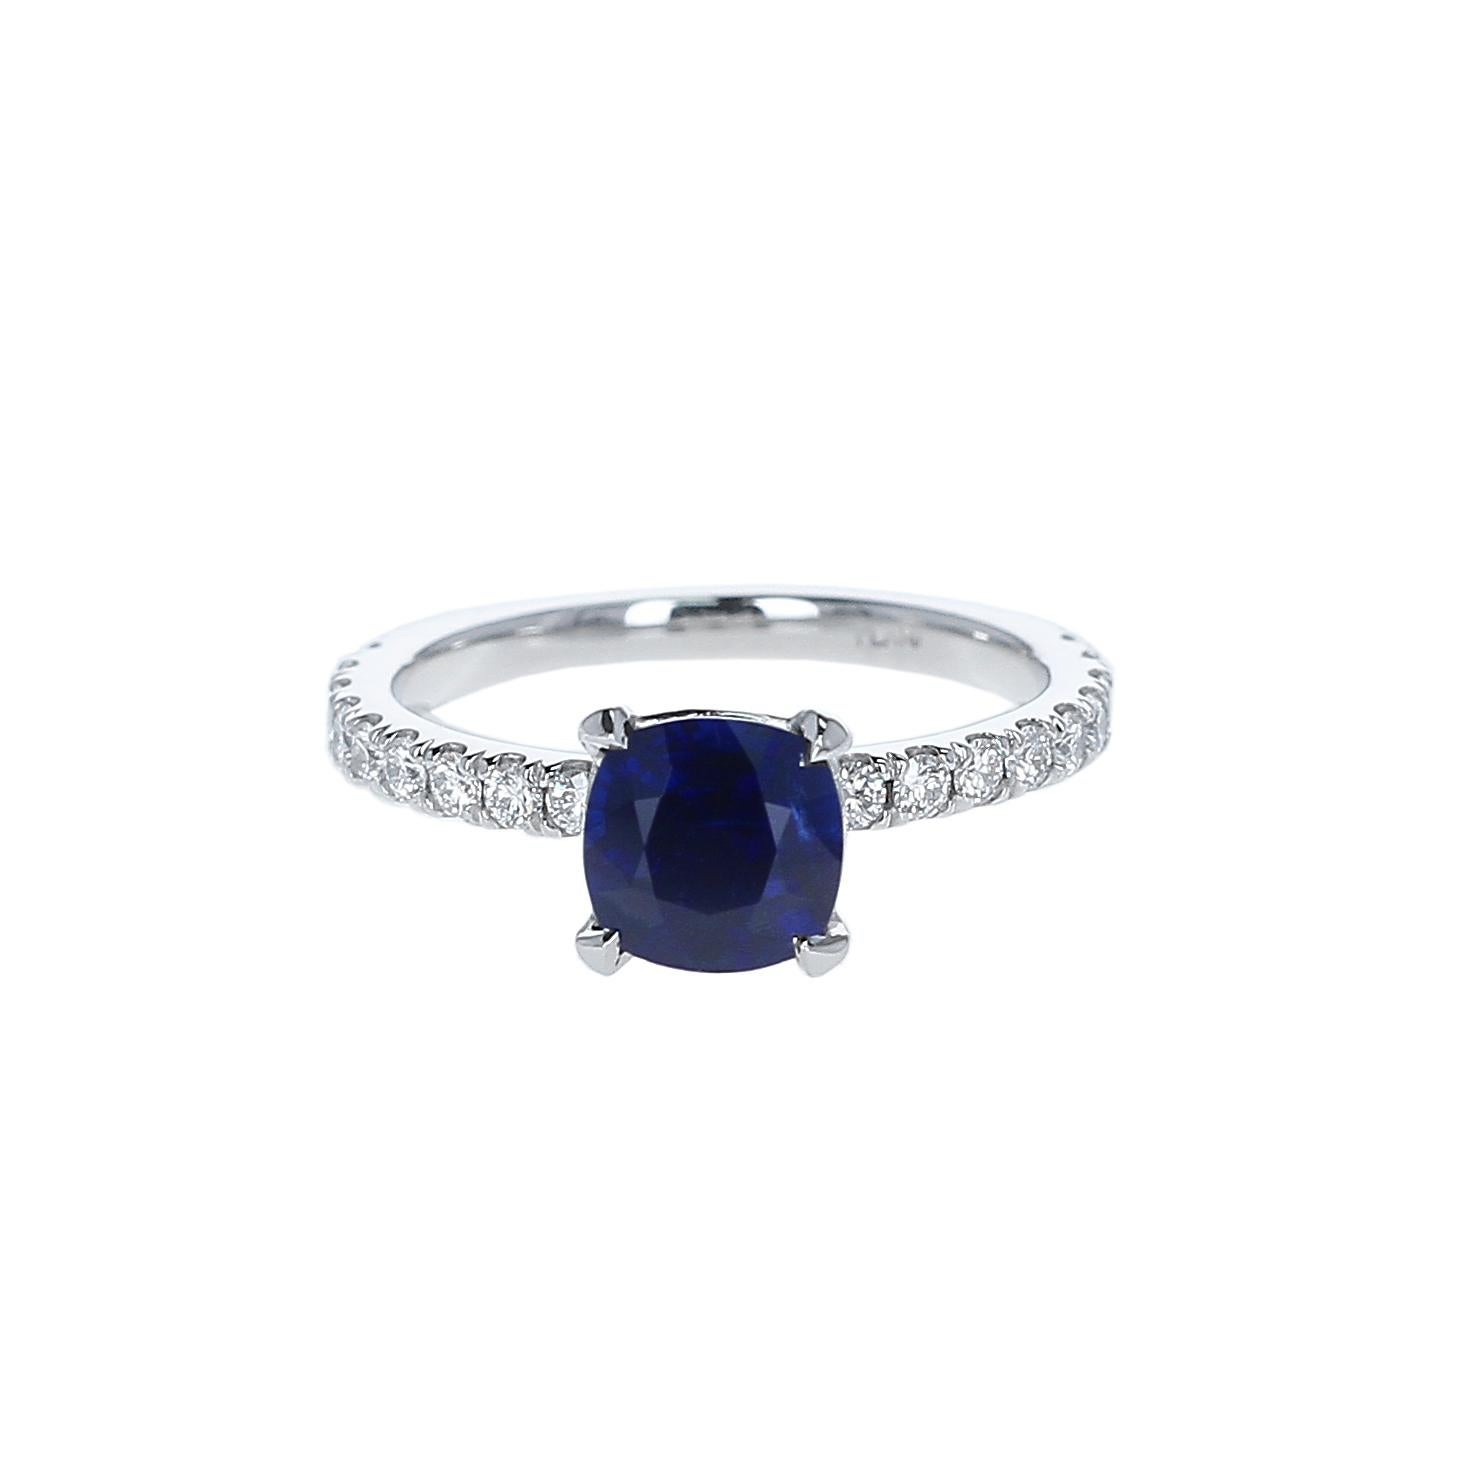 A beautiful and natural, no-heat unheated sapphire and diamond engagement ring by Gem + Honey. This jewel is centered with a 1.46-carat cushion-shaped blue sapphire from Burma (Myanmar), accented with eighteen round brilliant-cut natural,